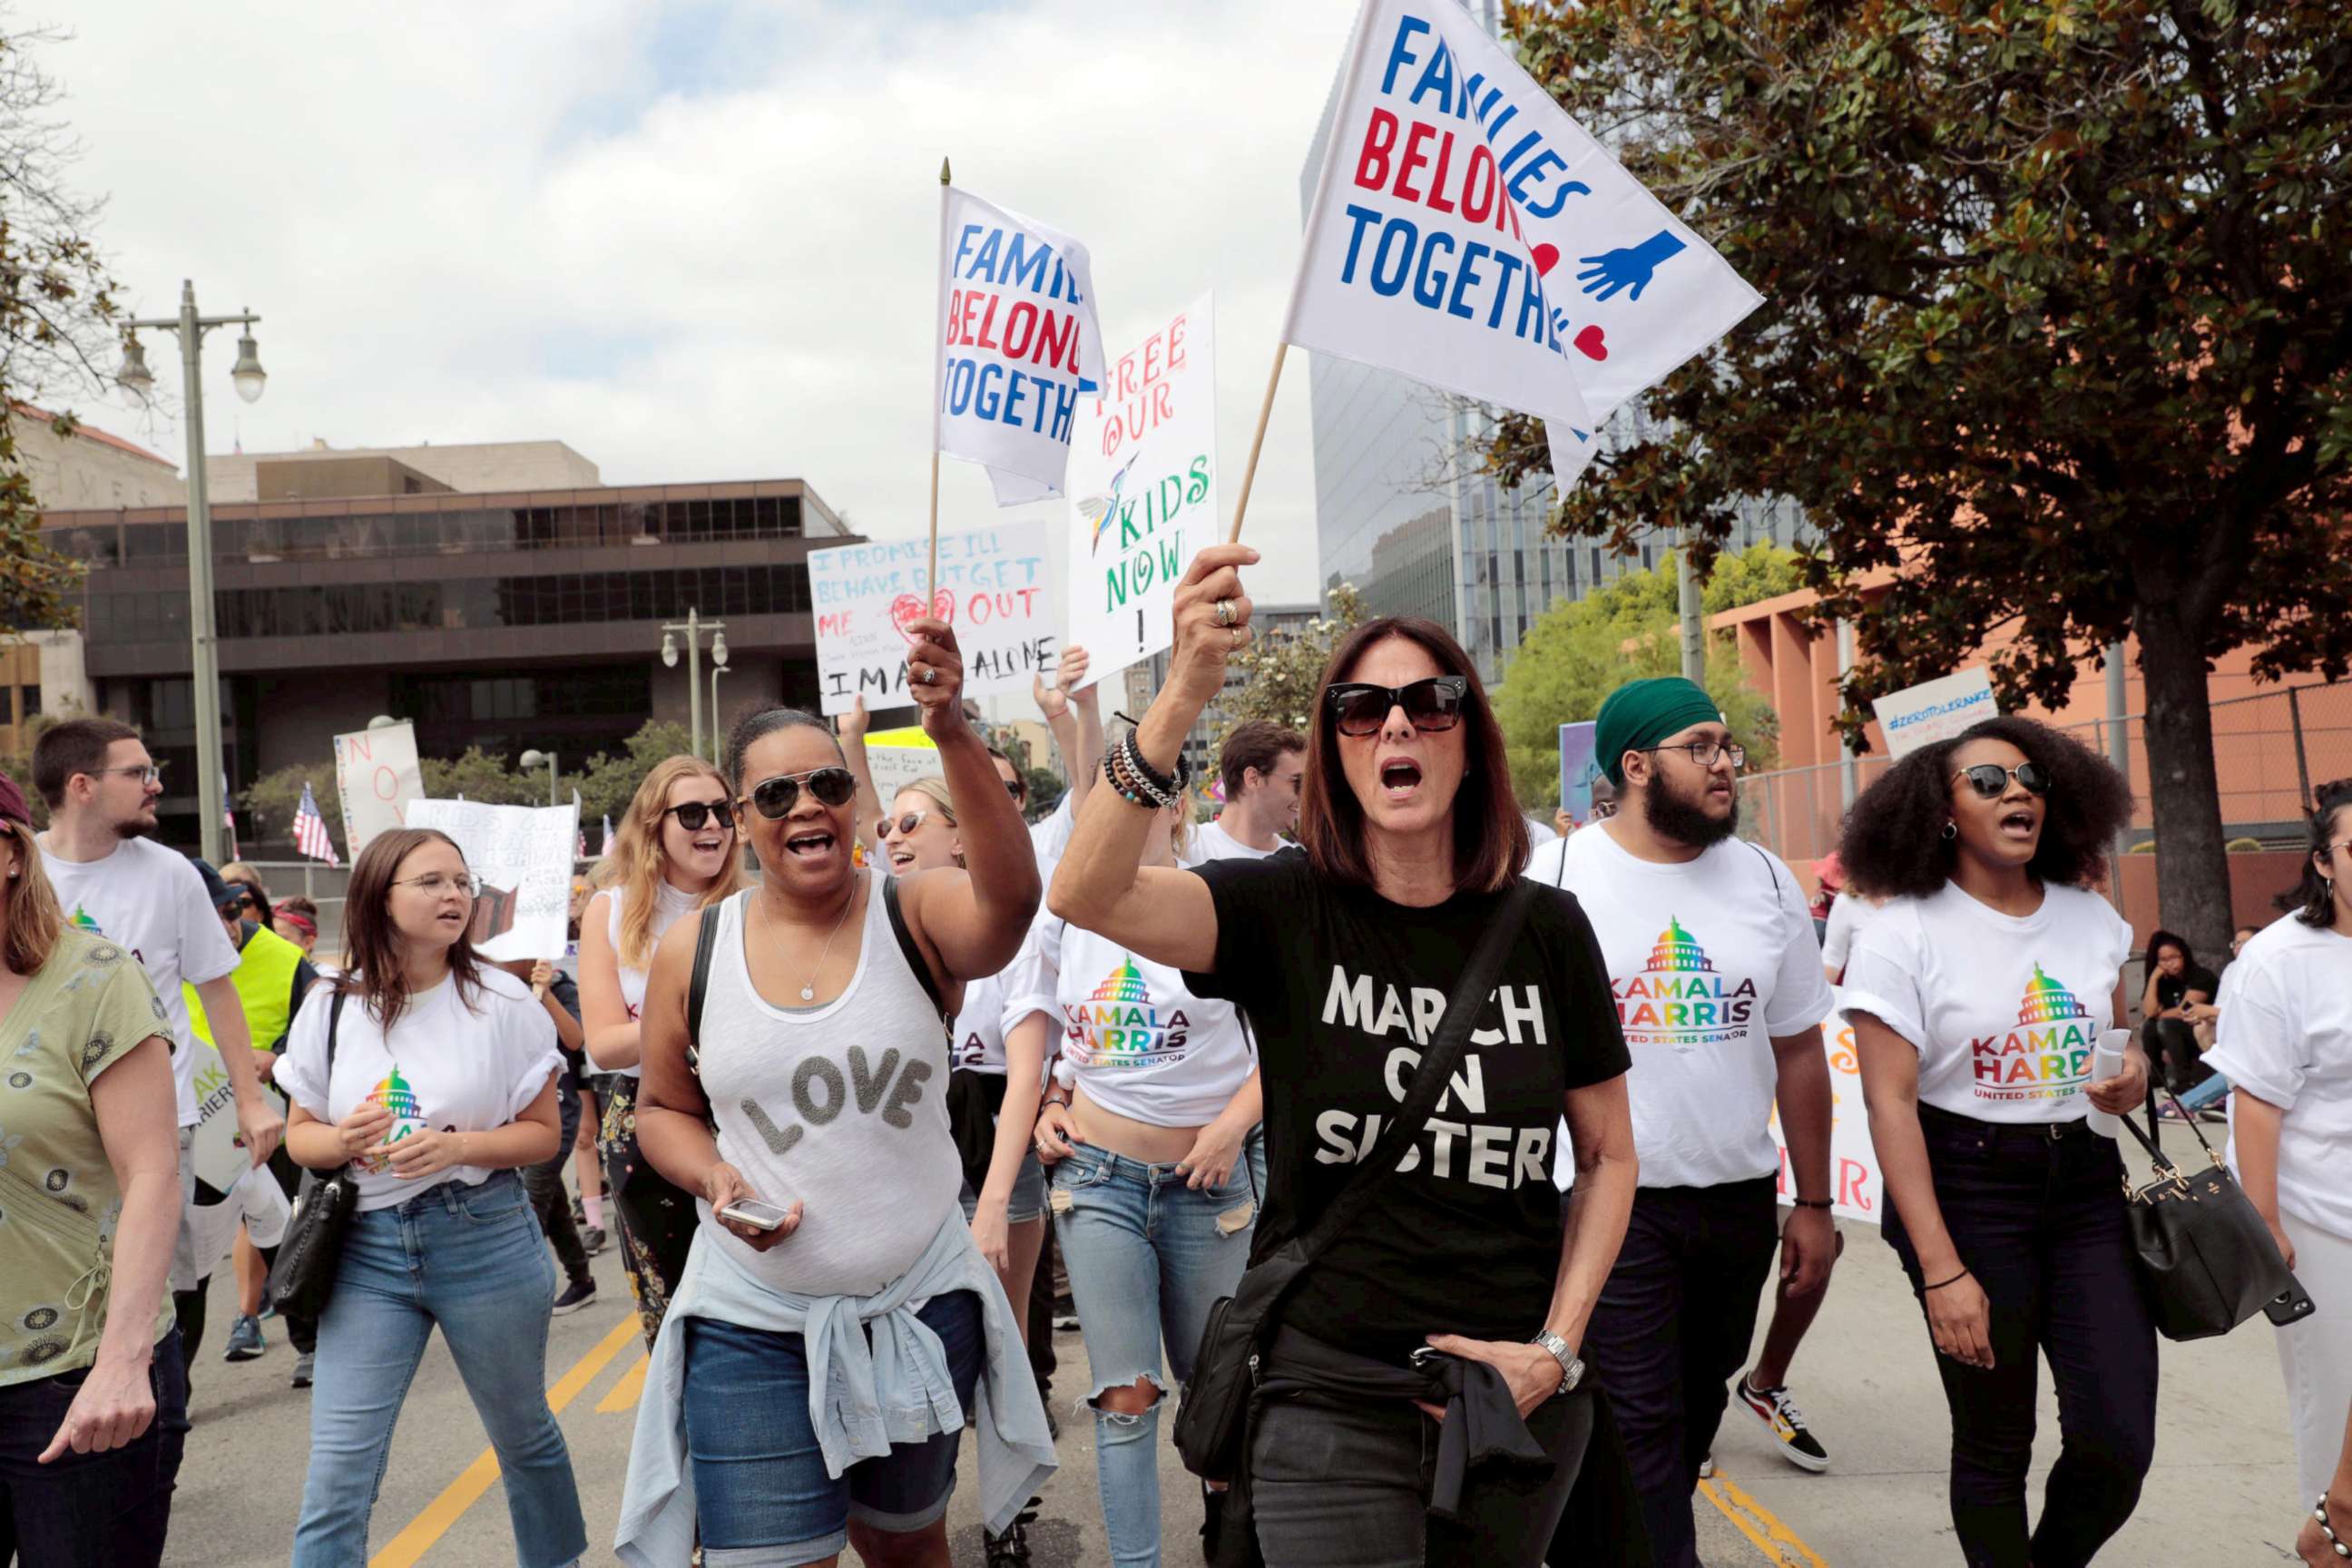 PHOTO: Demonstrators protest during a national day of action called "Keep Families Together" to protest the Trump administration's "Zero Tolerance" policy in Los Angeles, June 30, 2018.